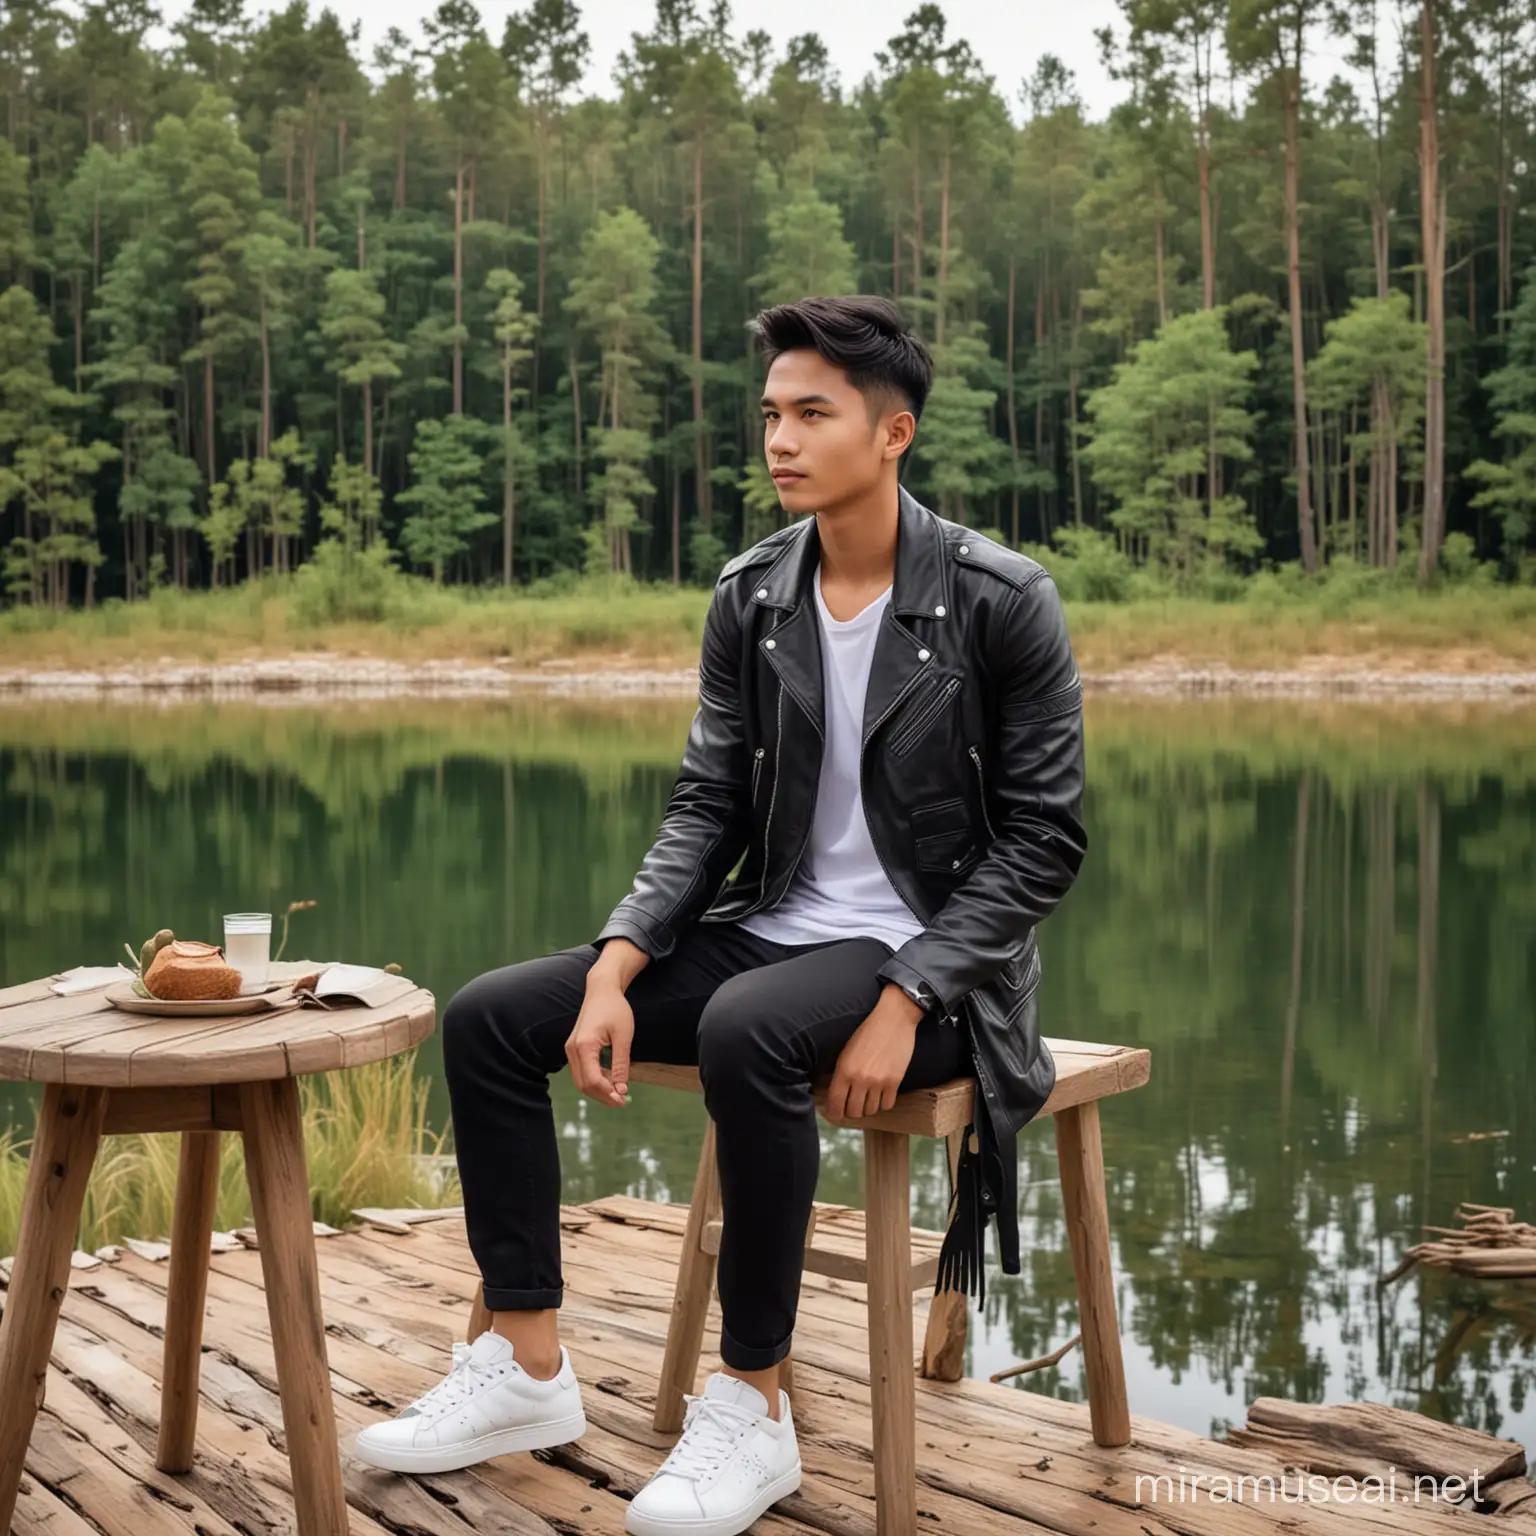 
Handsome man from Indonesia, short hair parted neatly to the side, round face, height 170, weight 70, full body, wearing a white t-shirt, black leather jacket, white shoes, sitting on a wooden chair, with girlfriend, with a pine forest and lake in the background